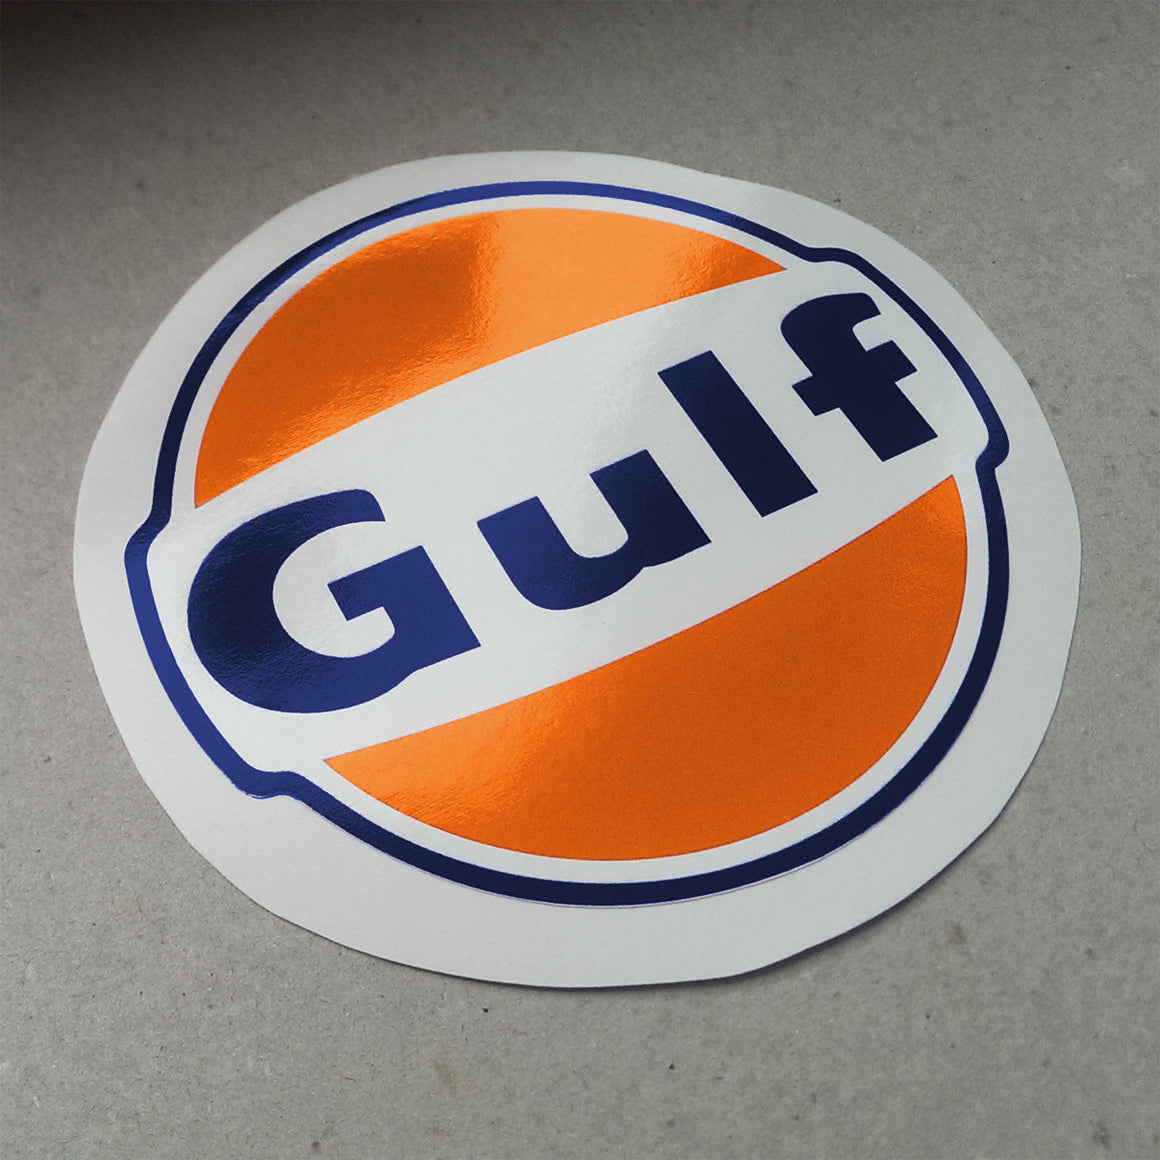 (New) Vintage 'GULF' Decal